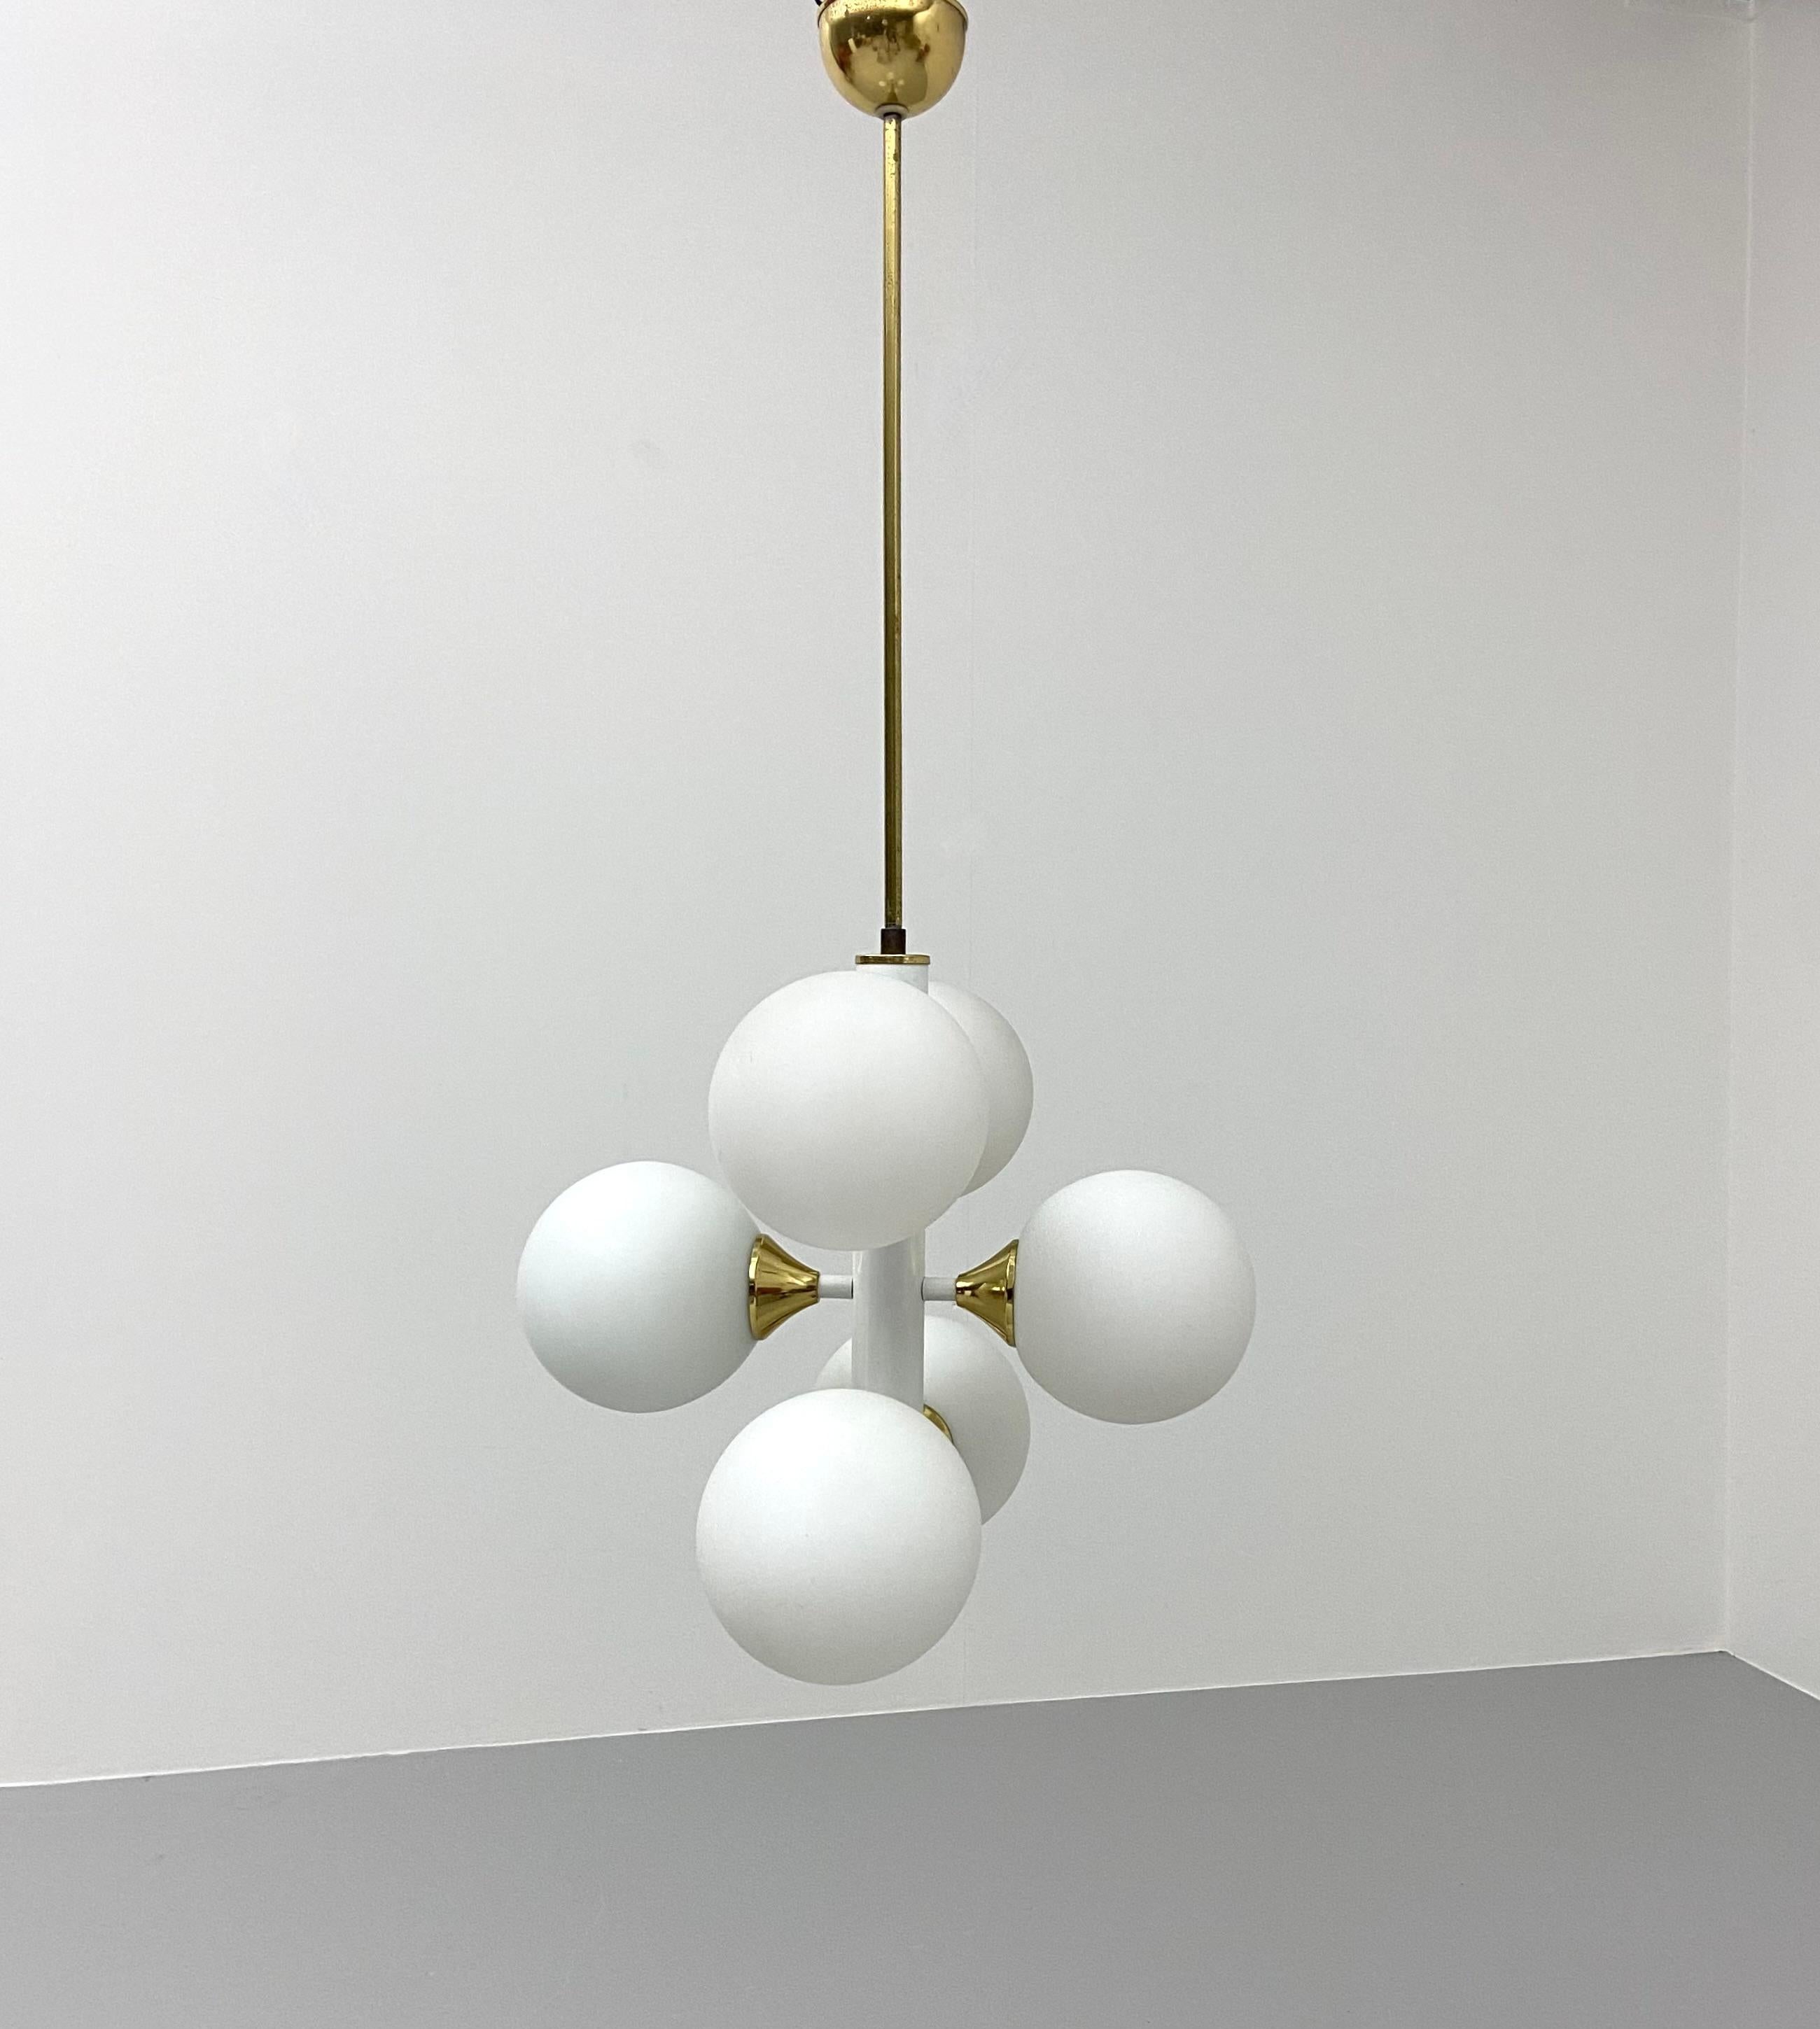 Kaiser Leuchten Sputnik in brass and metal with 6 Opaline Bulbs, Germany, 1970's

Fantastic combination of materials and colours and shapes. The sharp contrast between the brass and the white metal gives this chandelier a luxurious and kitch